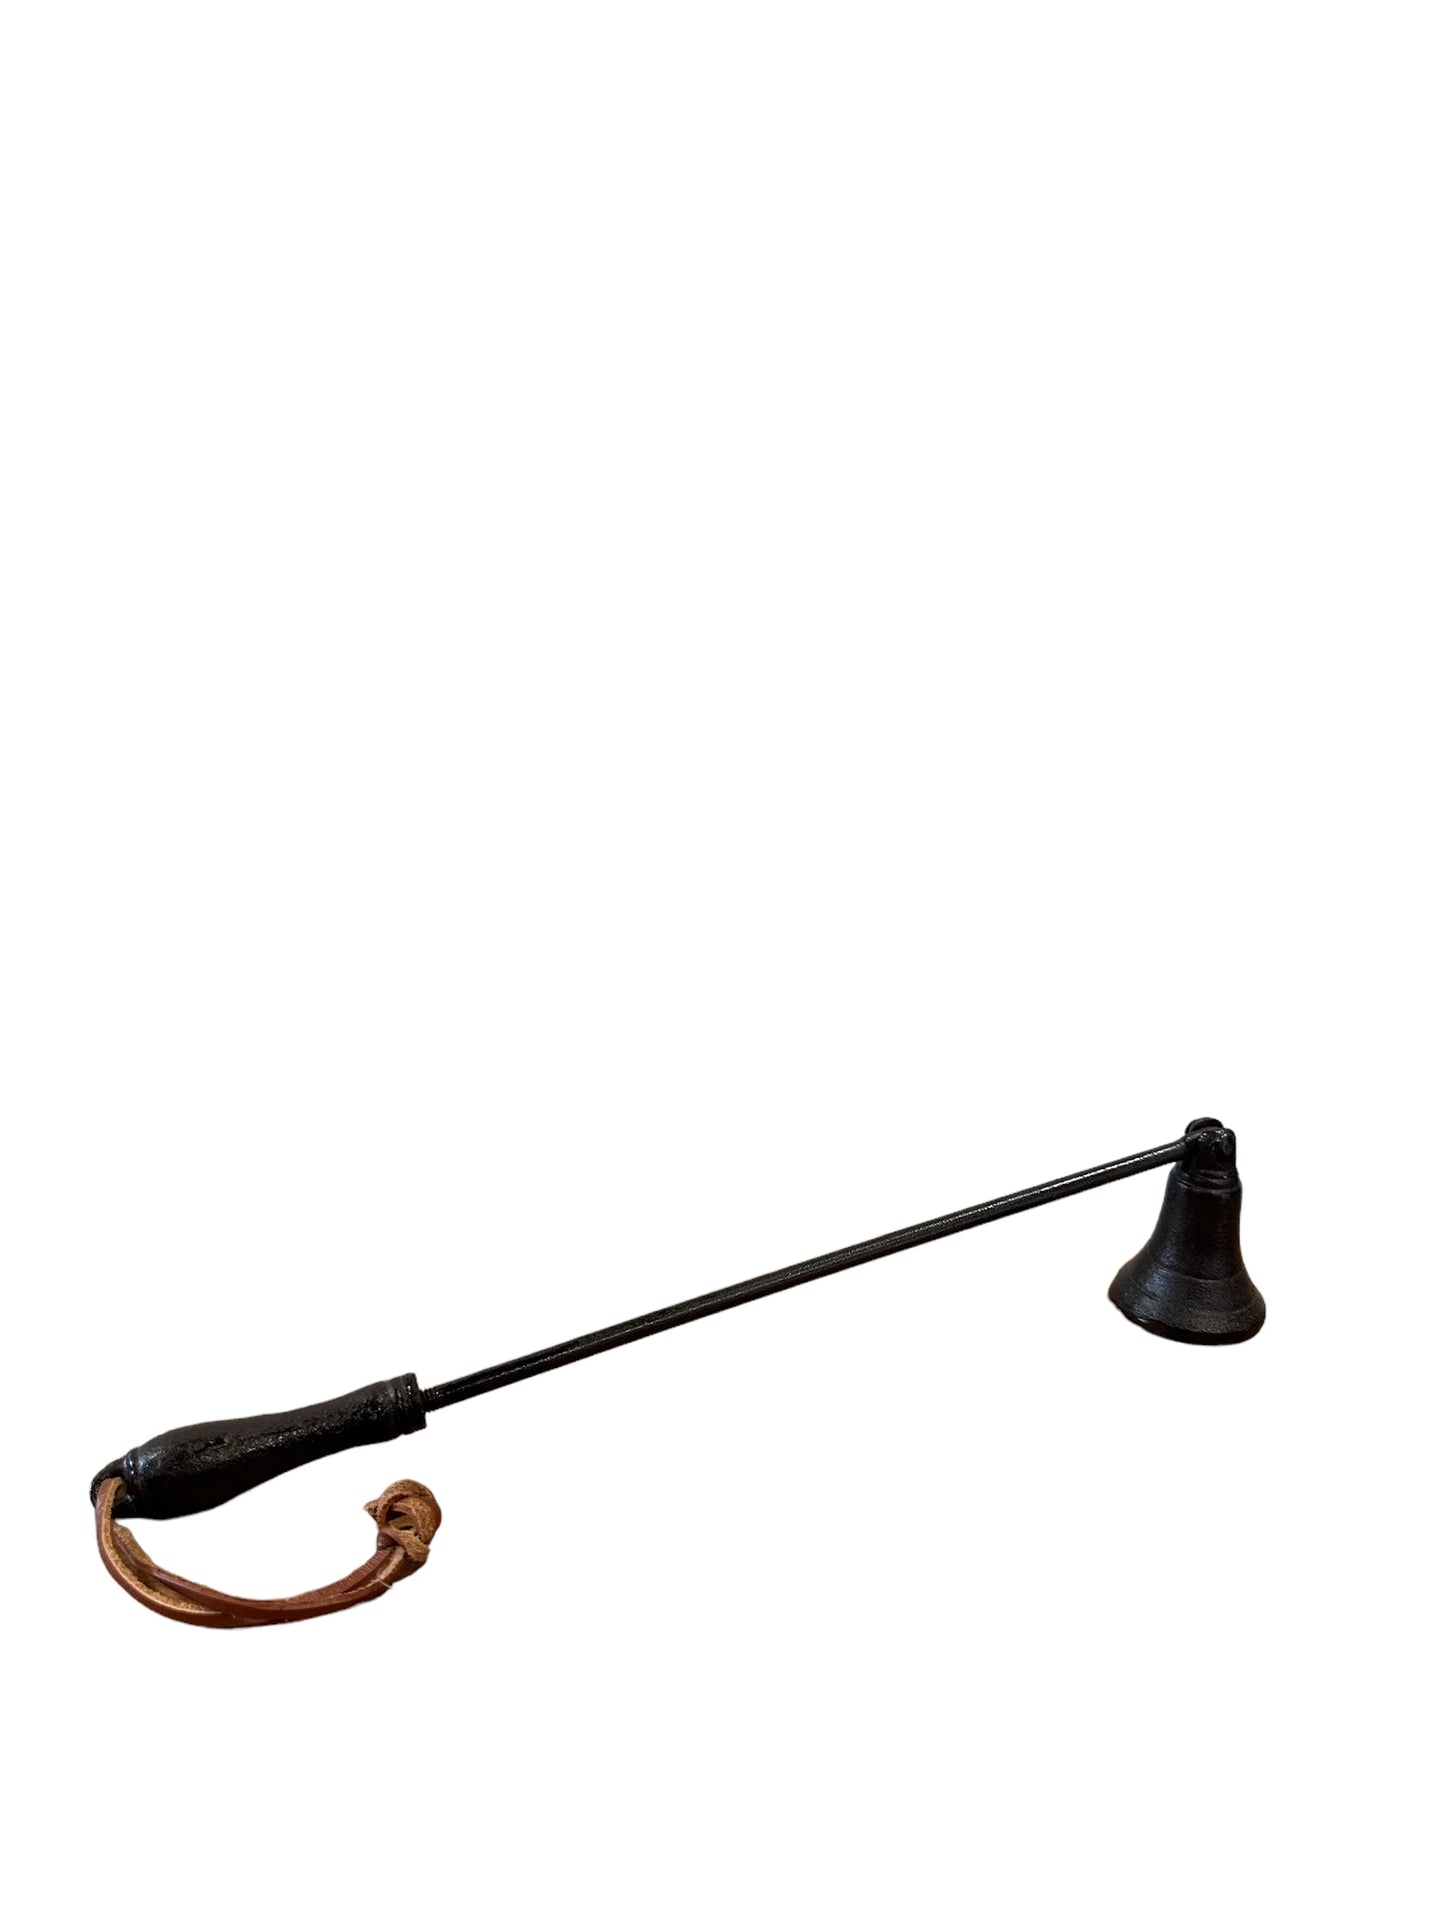 AB5484 -Candle Snuffer